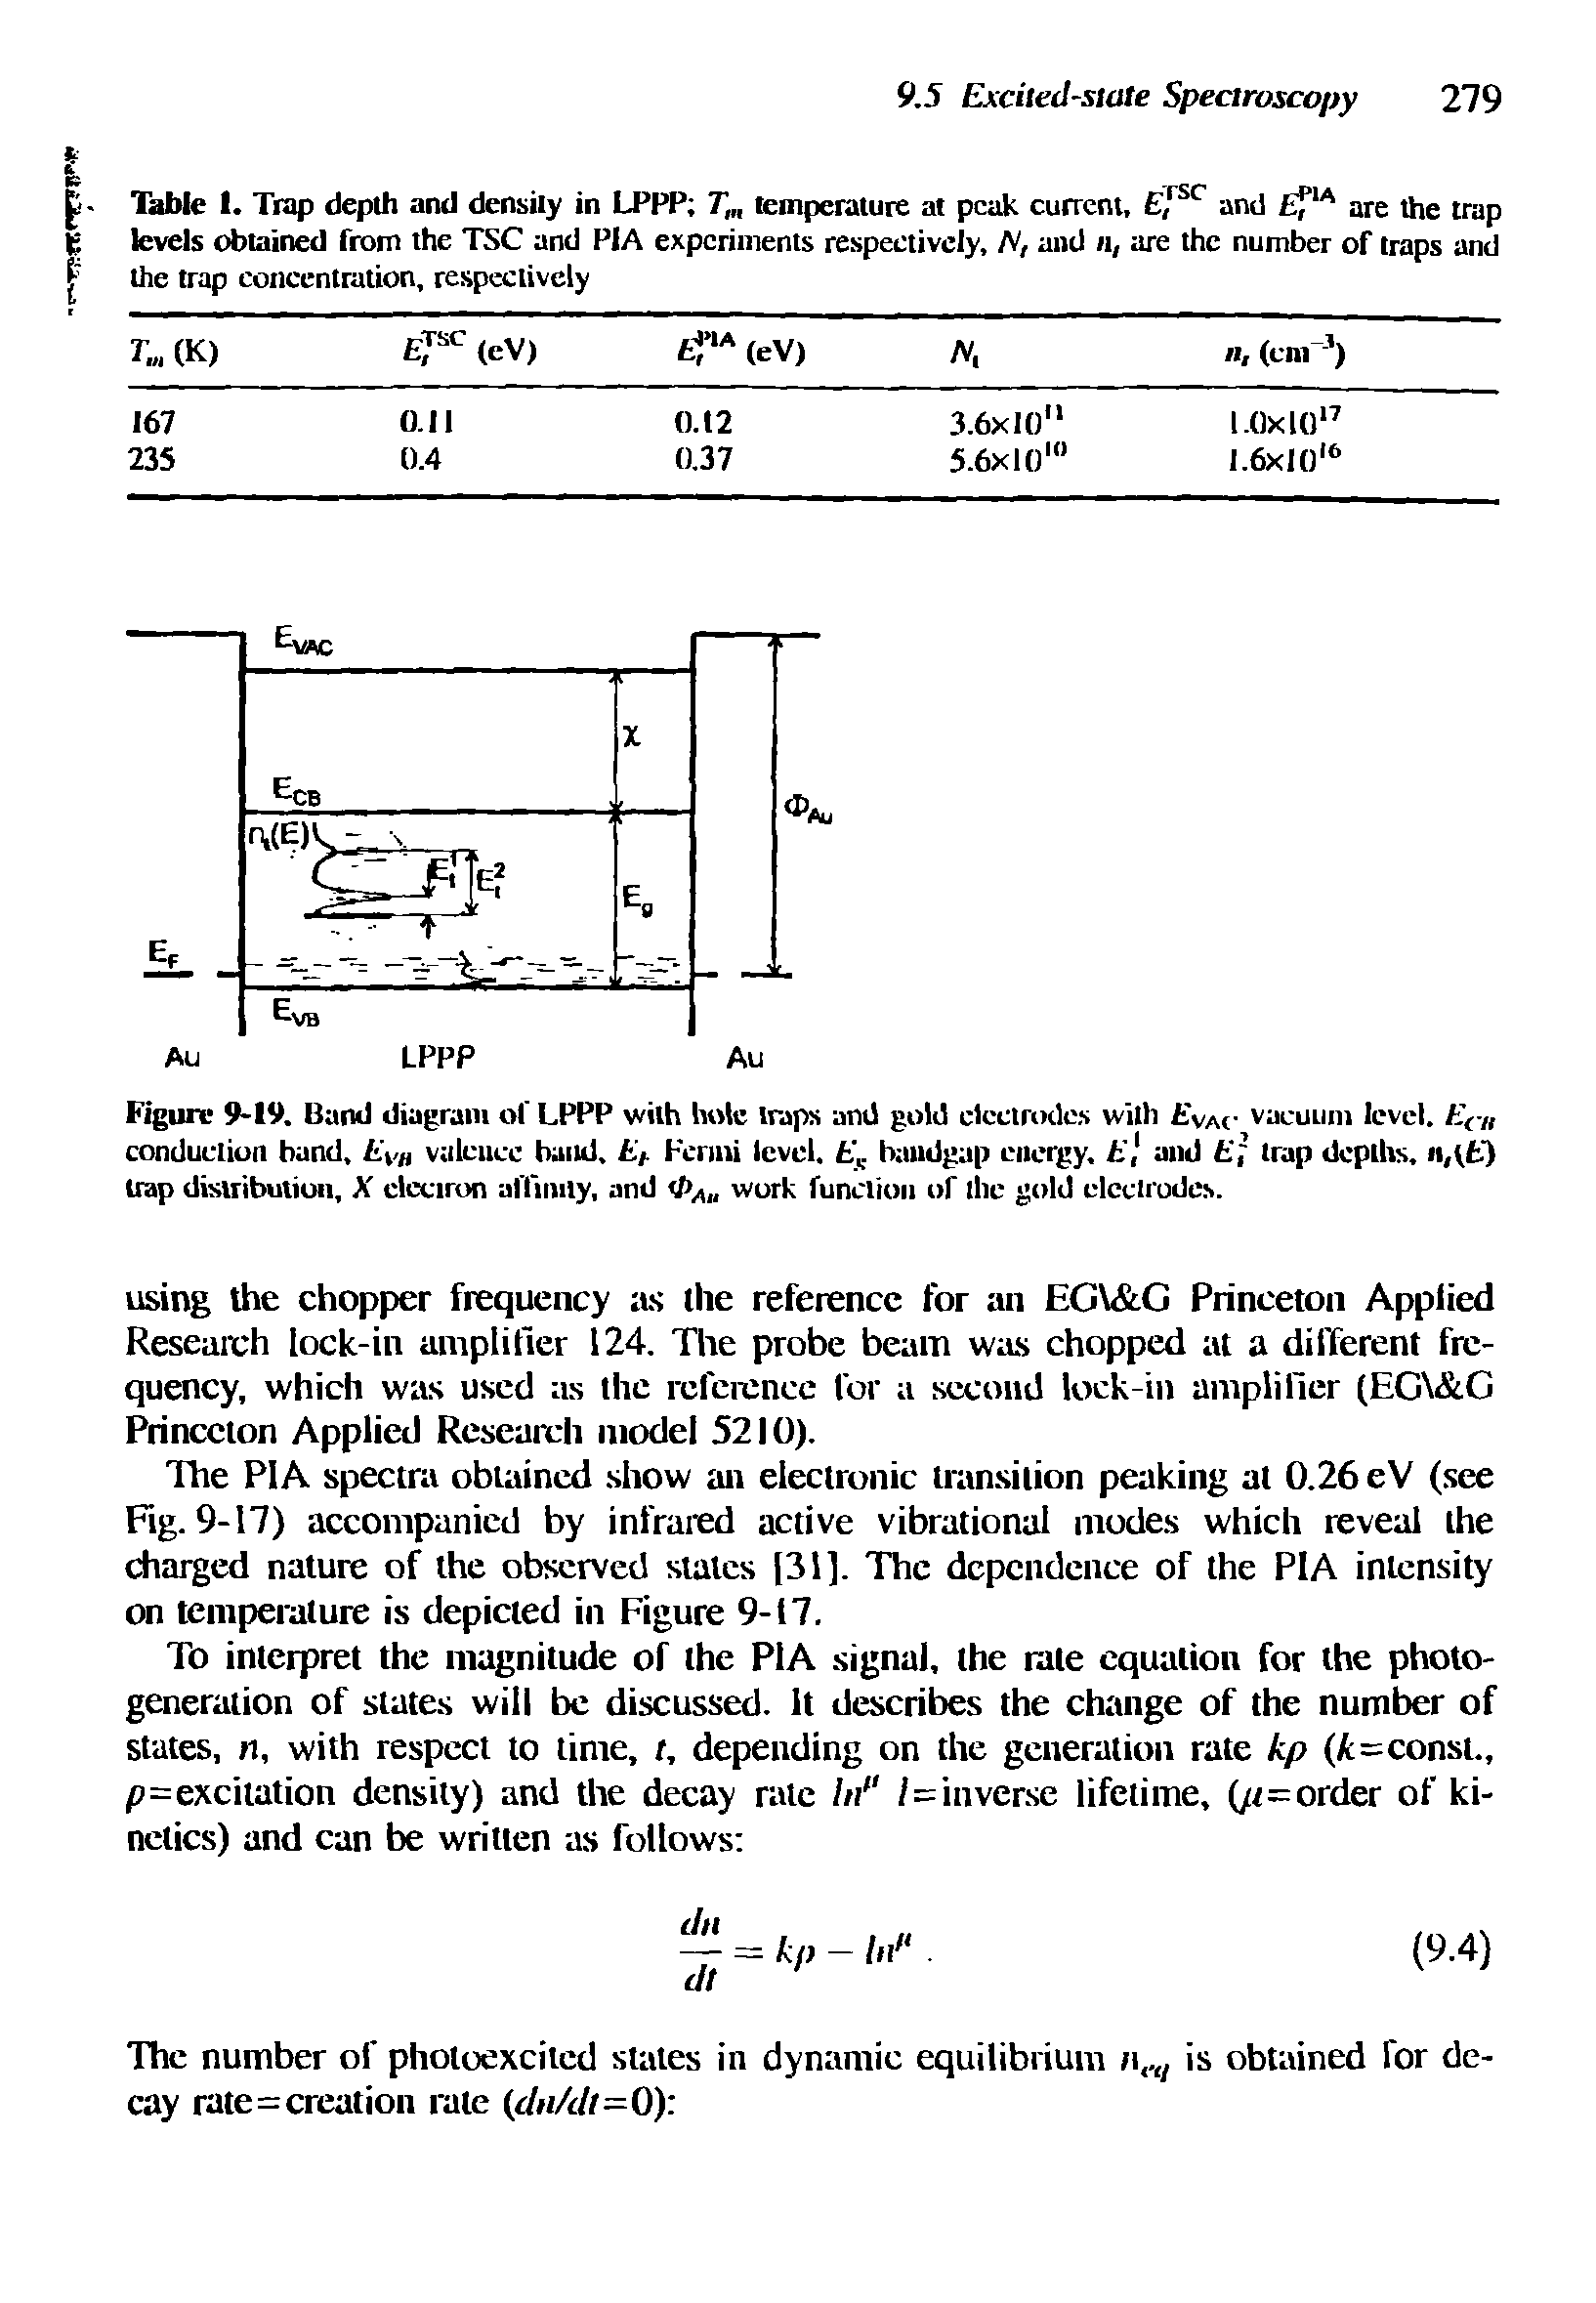 Figure 9-19. Bund diagram of LPPP with hole traps and gold electrodes with Va<- vacuum level. Ec conduction band, Eva valence band. E, Fermi level. . baudgup energy. and , " trap depths. ,( ) trap distribution, X electron affmity, and <J>All work function of the gold electrodes.